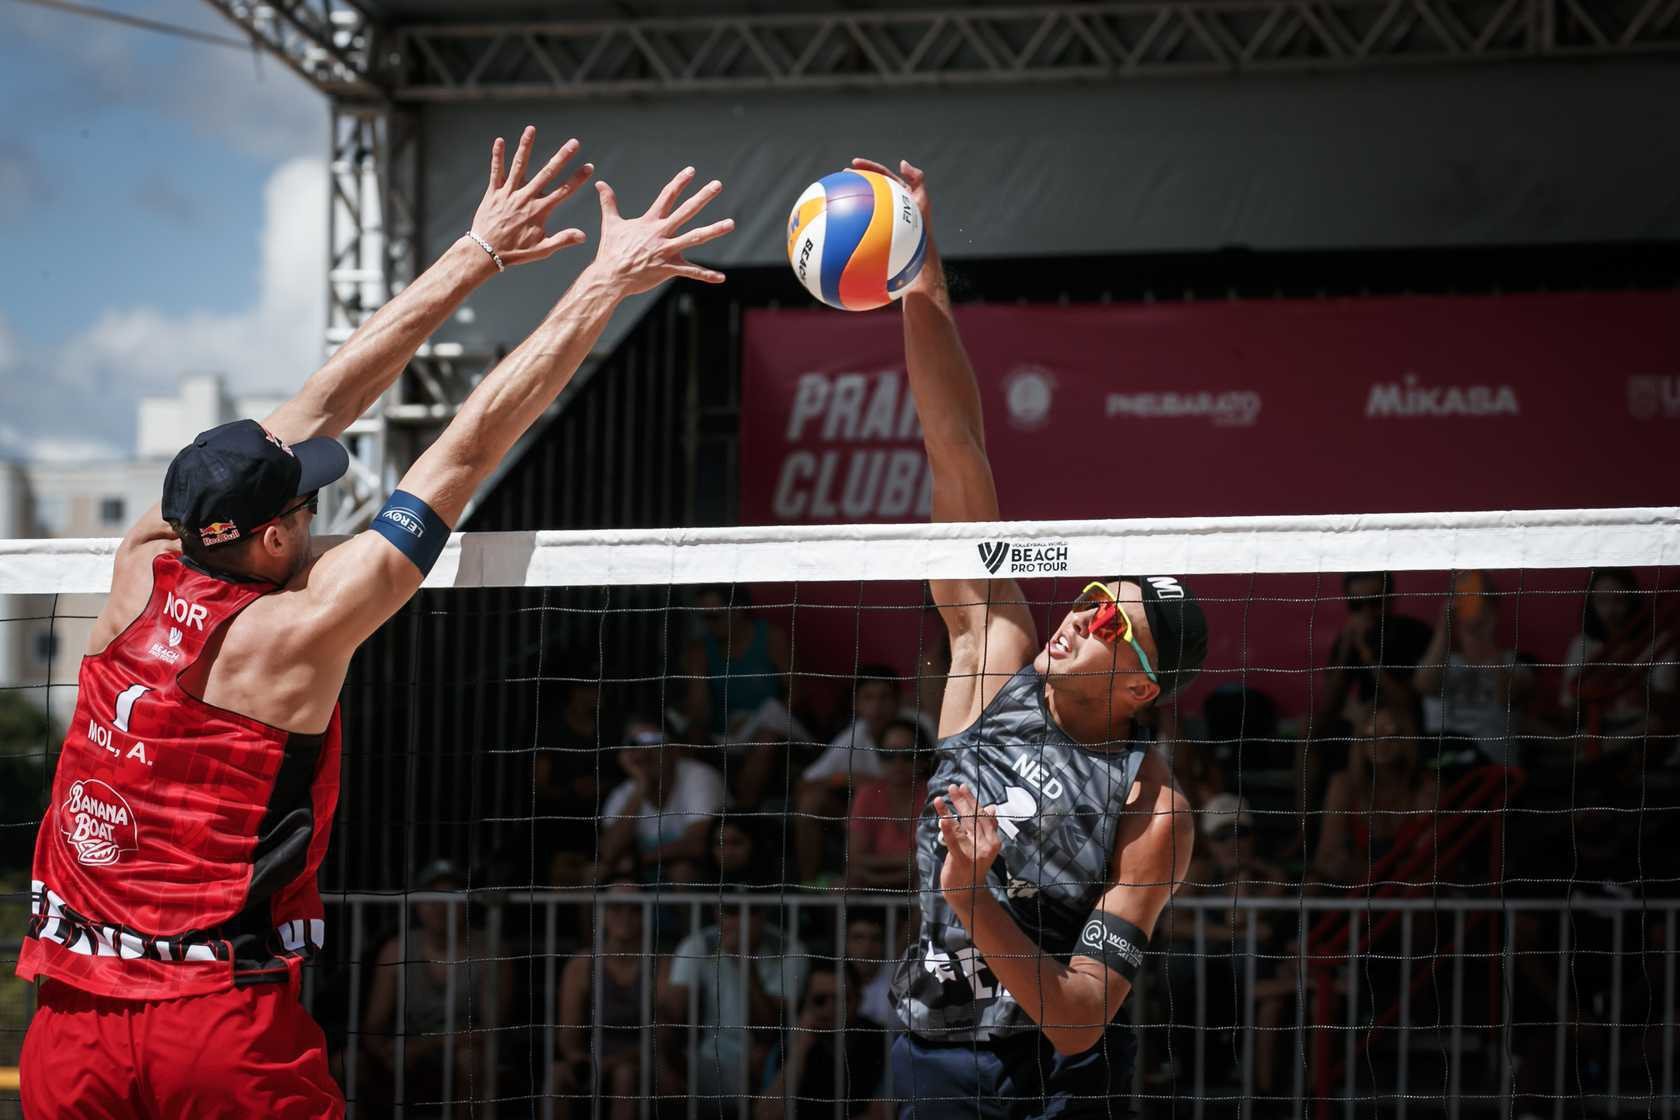 The agreement covers this year's major volleyball and beach volleyball events, including on the Beach Pro Tour ©Volleyball World